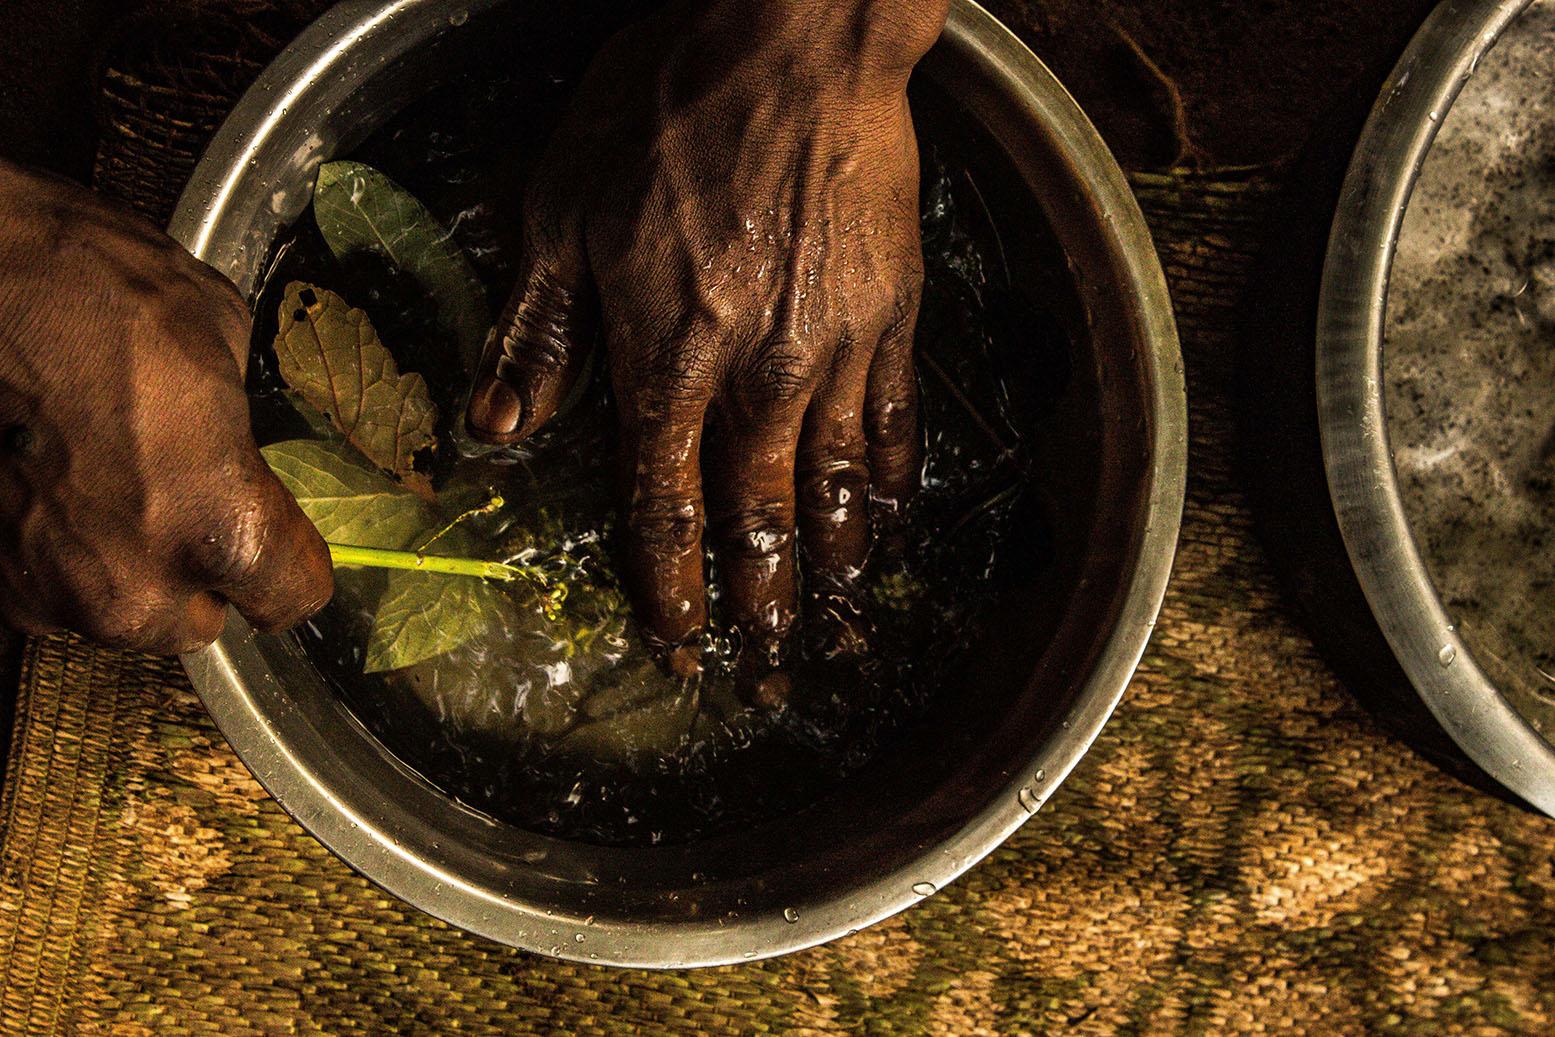 The herbalist (Long term) - “We wash the herbs to be able to clean them as we...